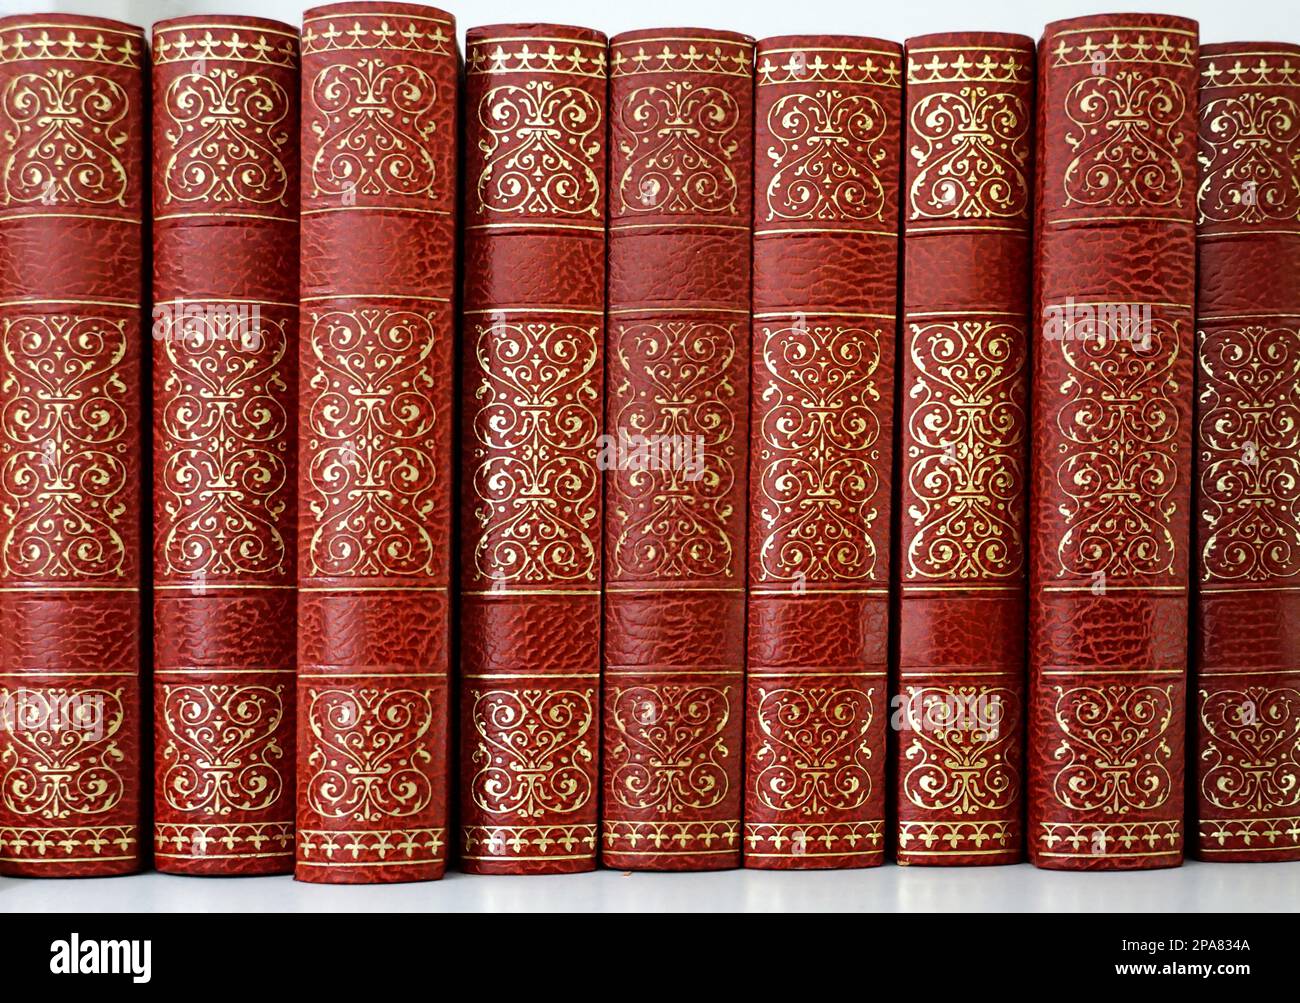 Beautiful vintage books decorated with abstract golden tendrils on red covers Stock Photo